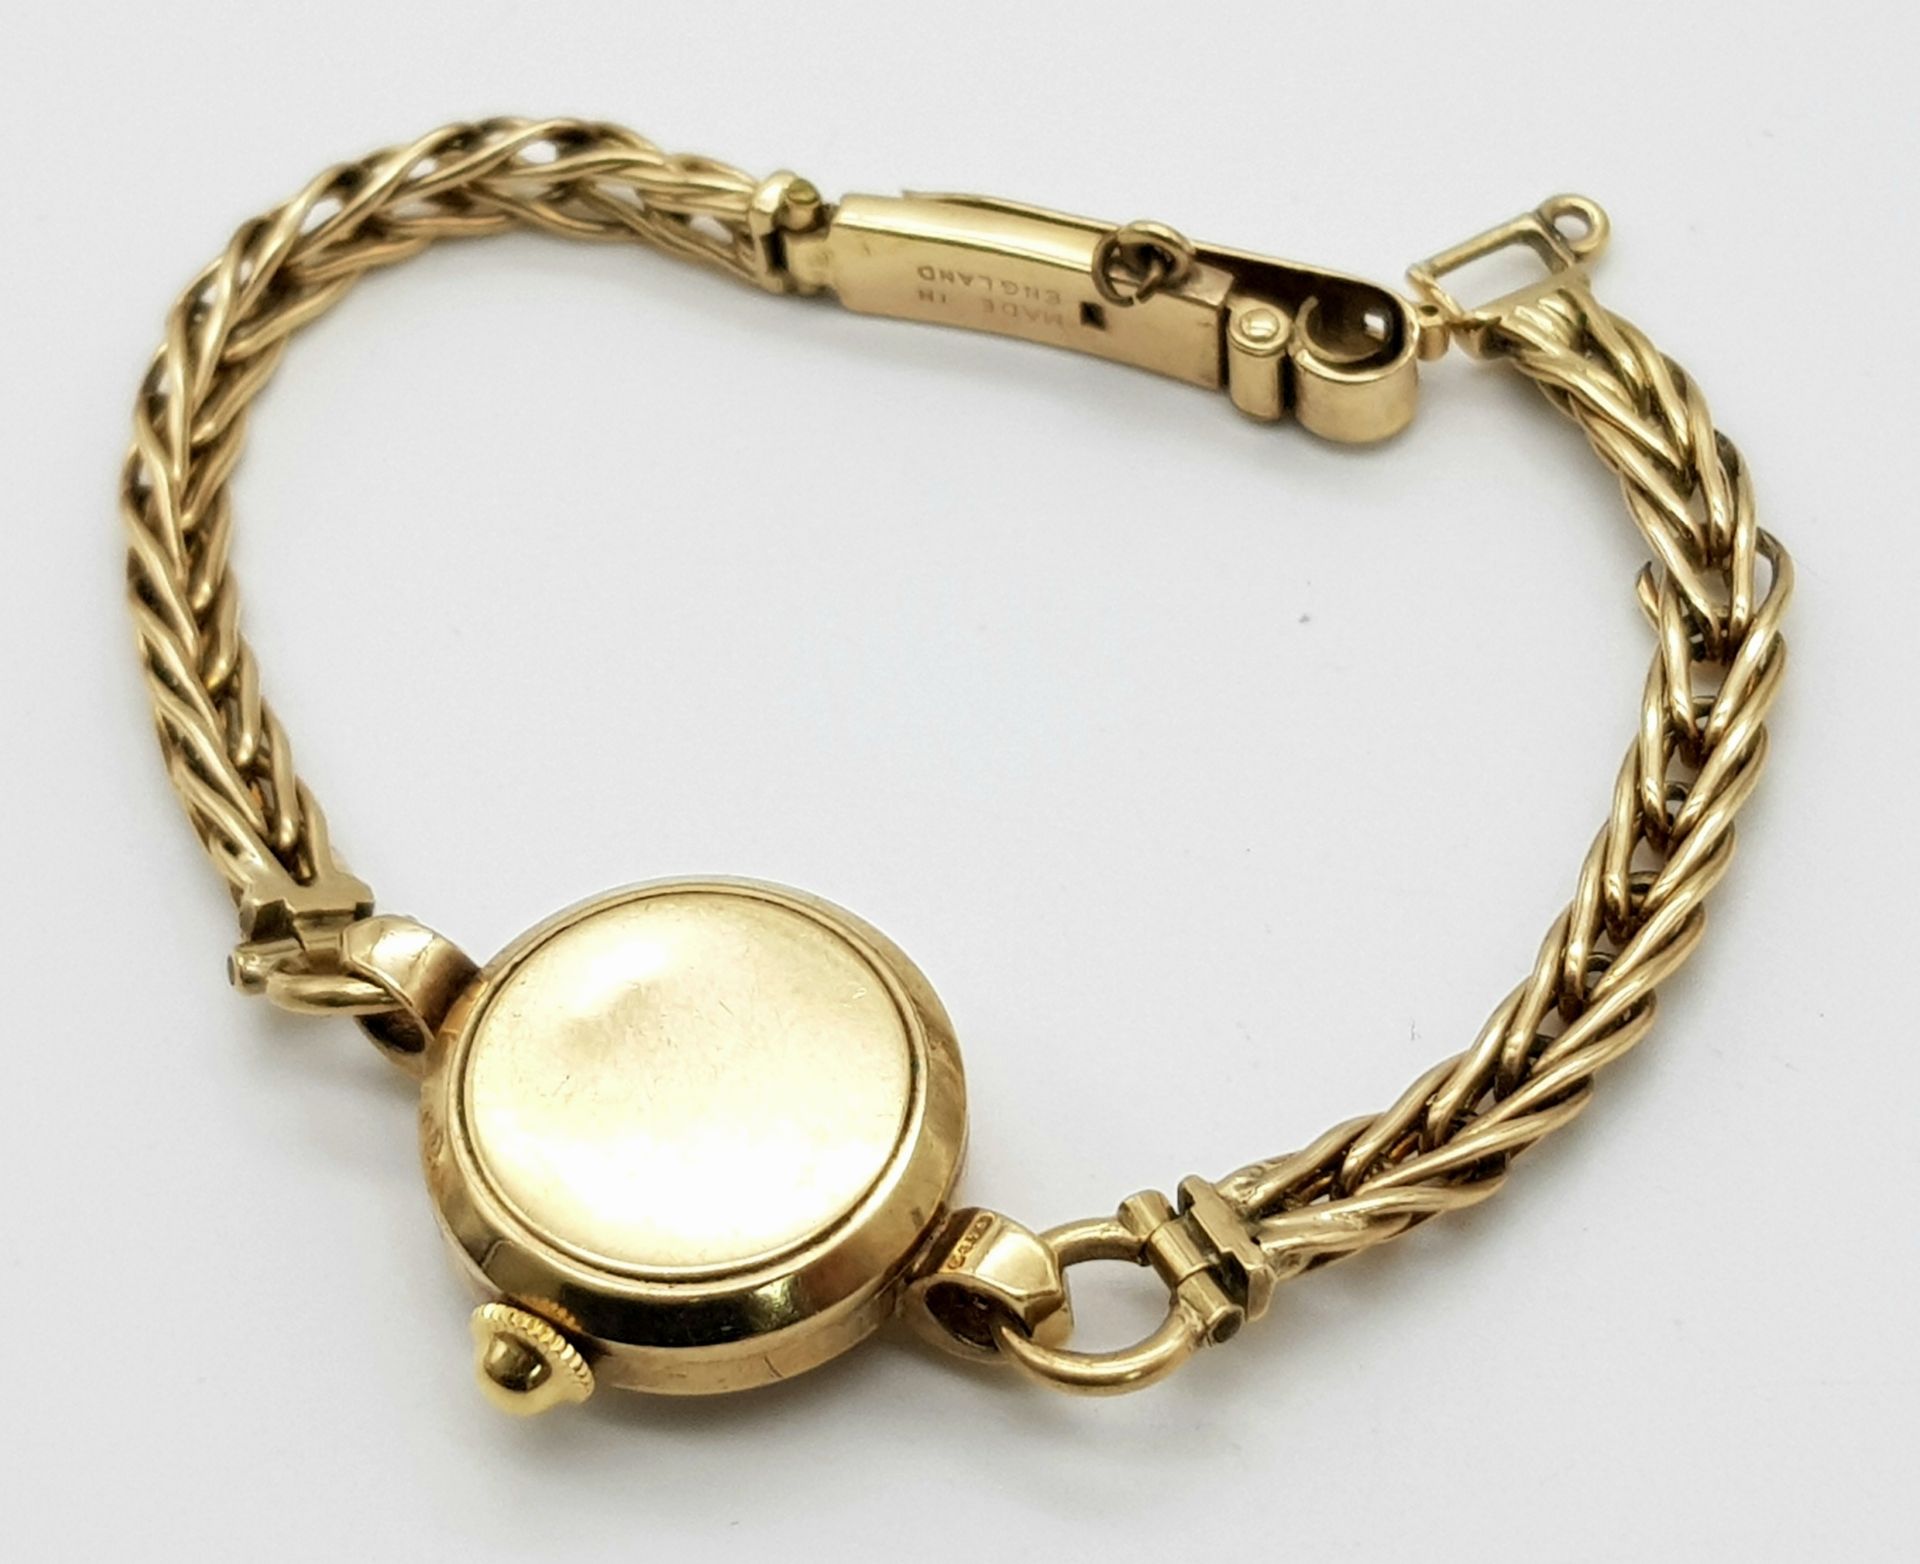 A Vintage 9K Yellow Gold Renown Ladies Watch. 9K gold bracelet and case - 18mm. Patinaed dial. - Image 3 of 6